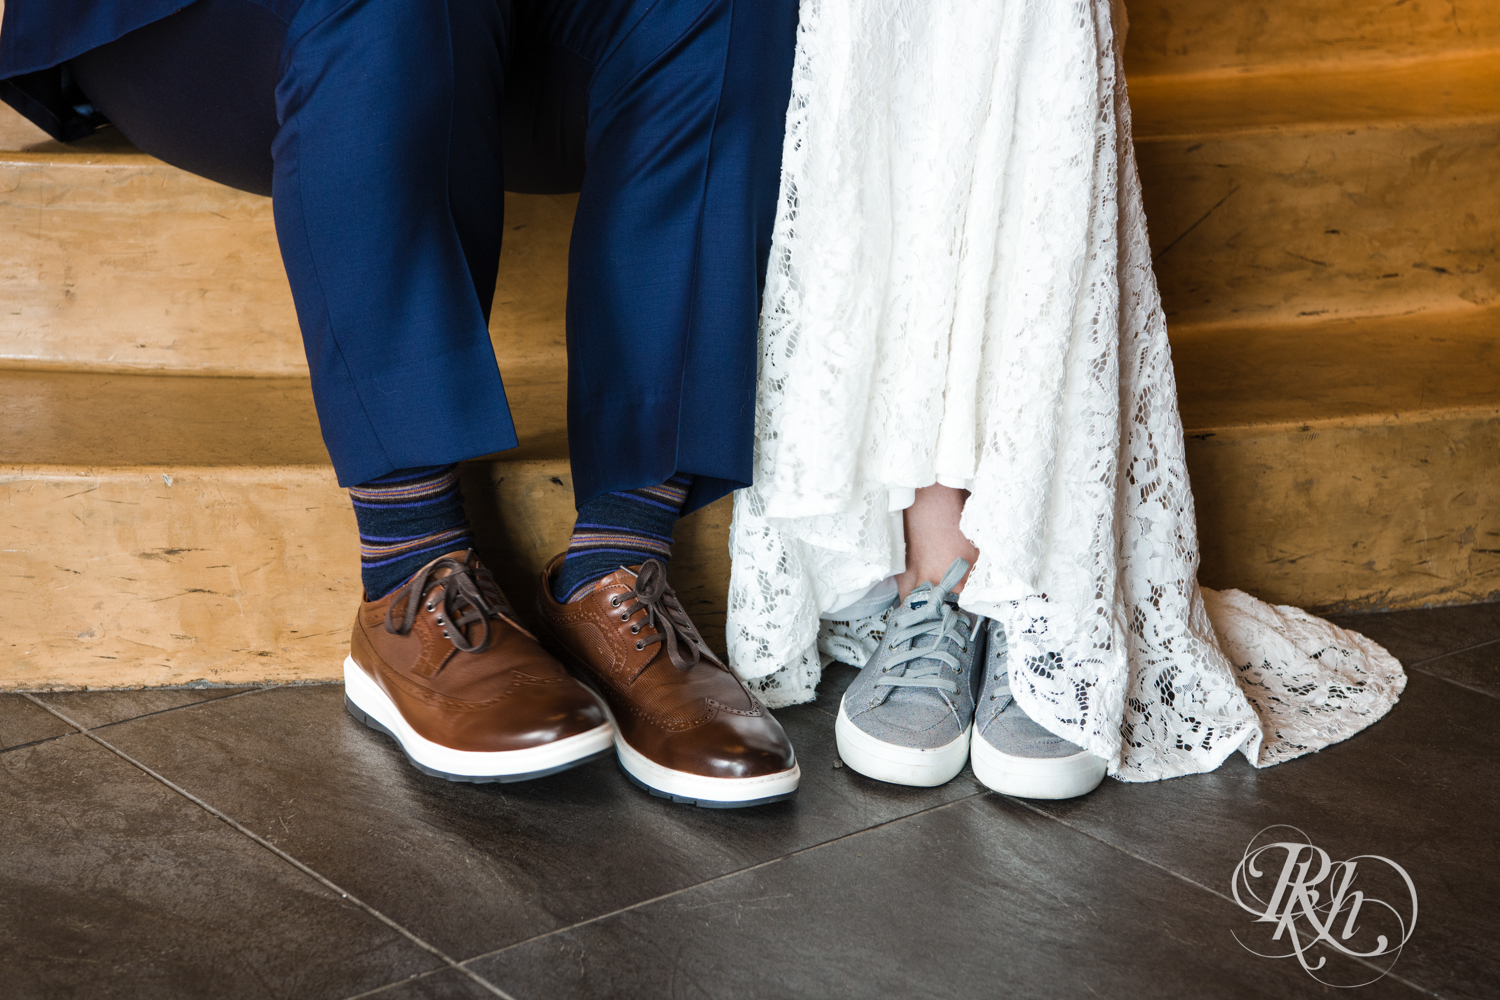 Bride and groom shoes